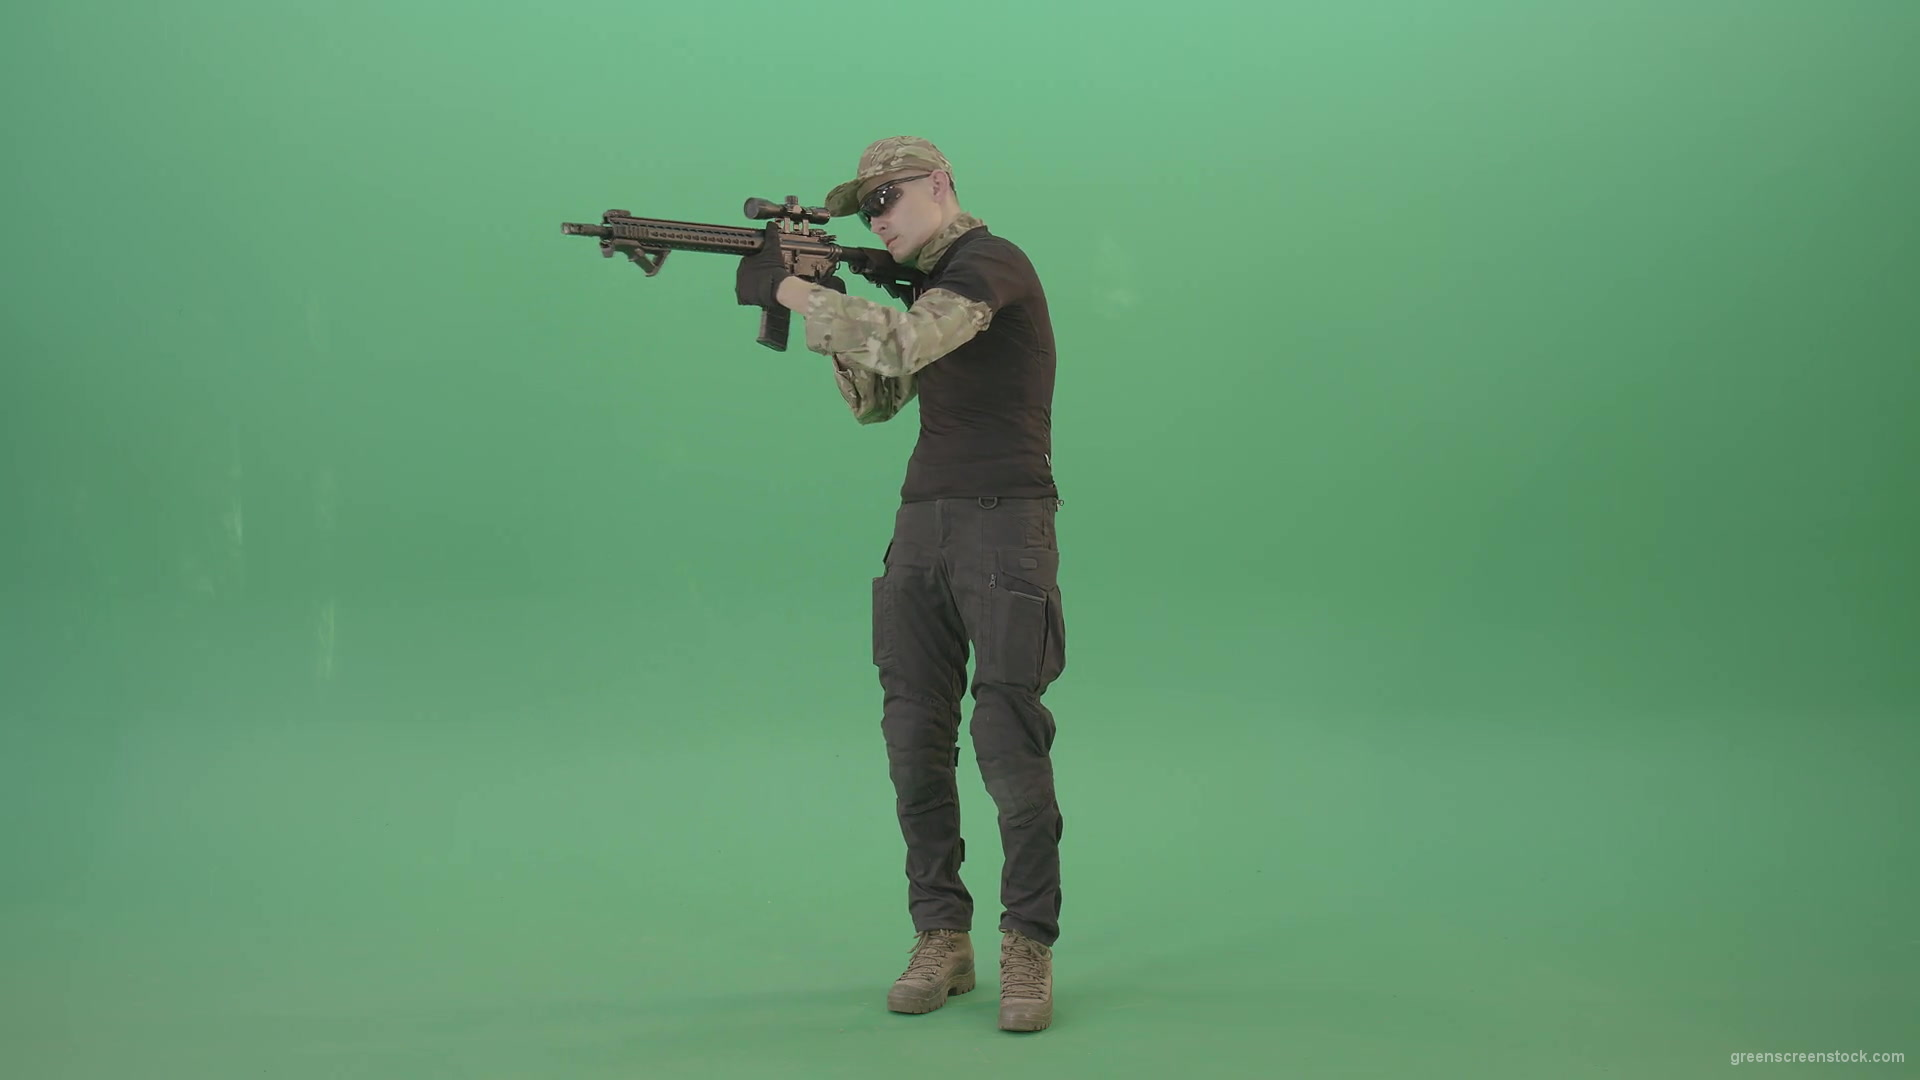 Man-in-Military-uniform-shooting-with-Army-machine-gun-isolated-on-Green-Screen-4K-Video-Footage-1920_005 Green Screen Stock